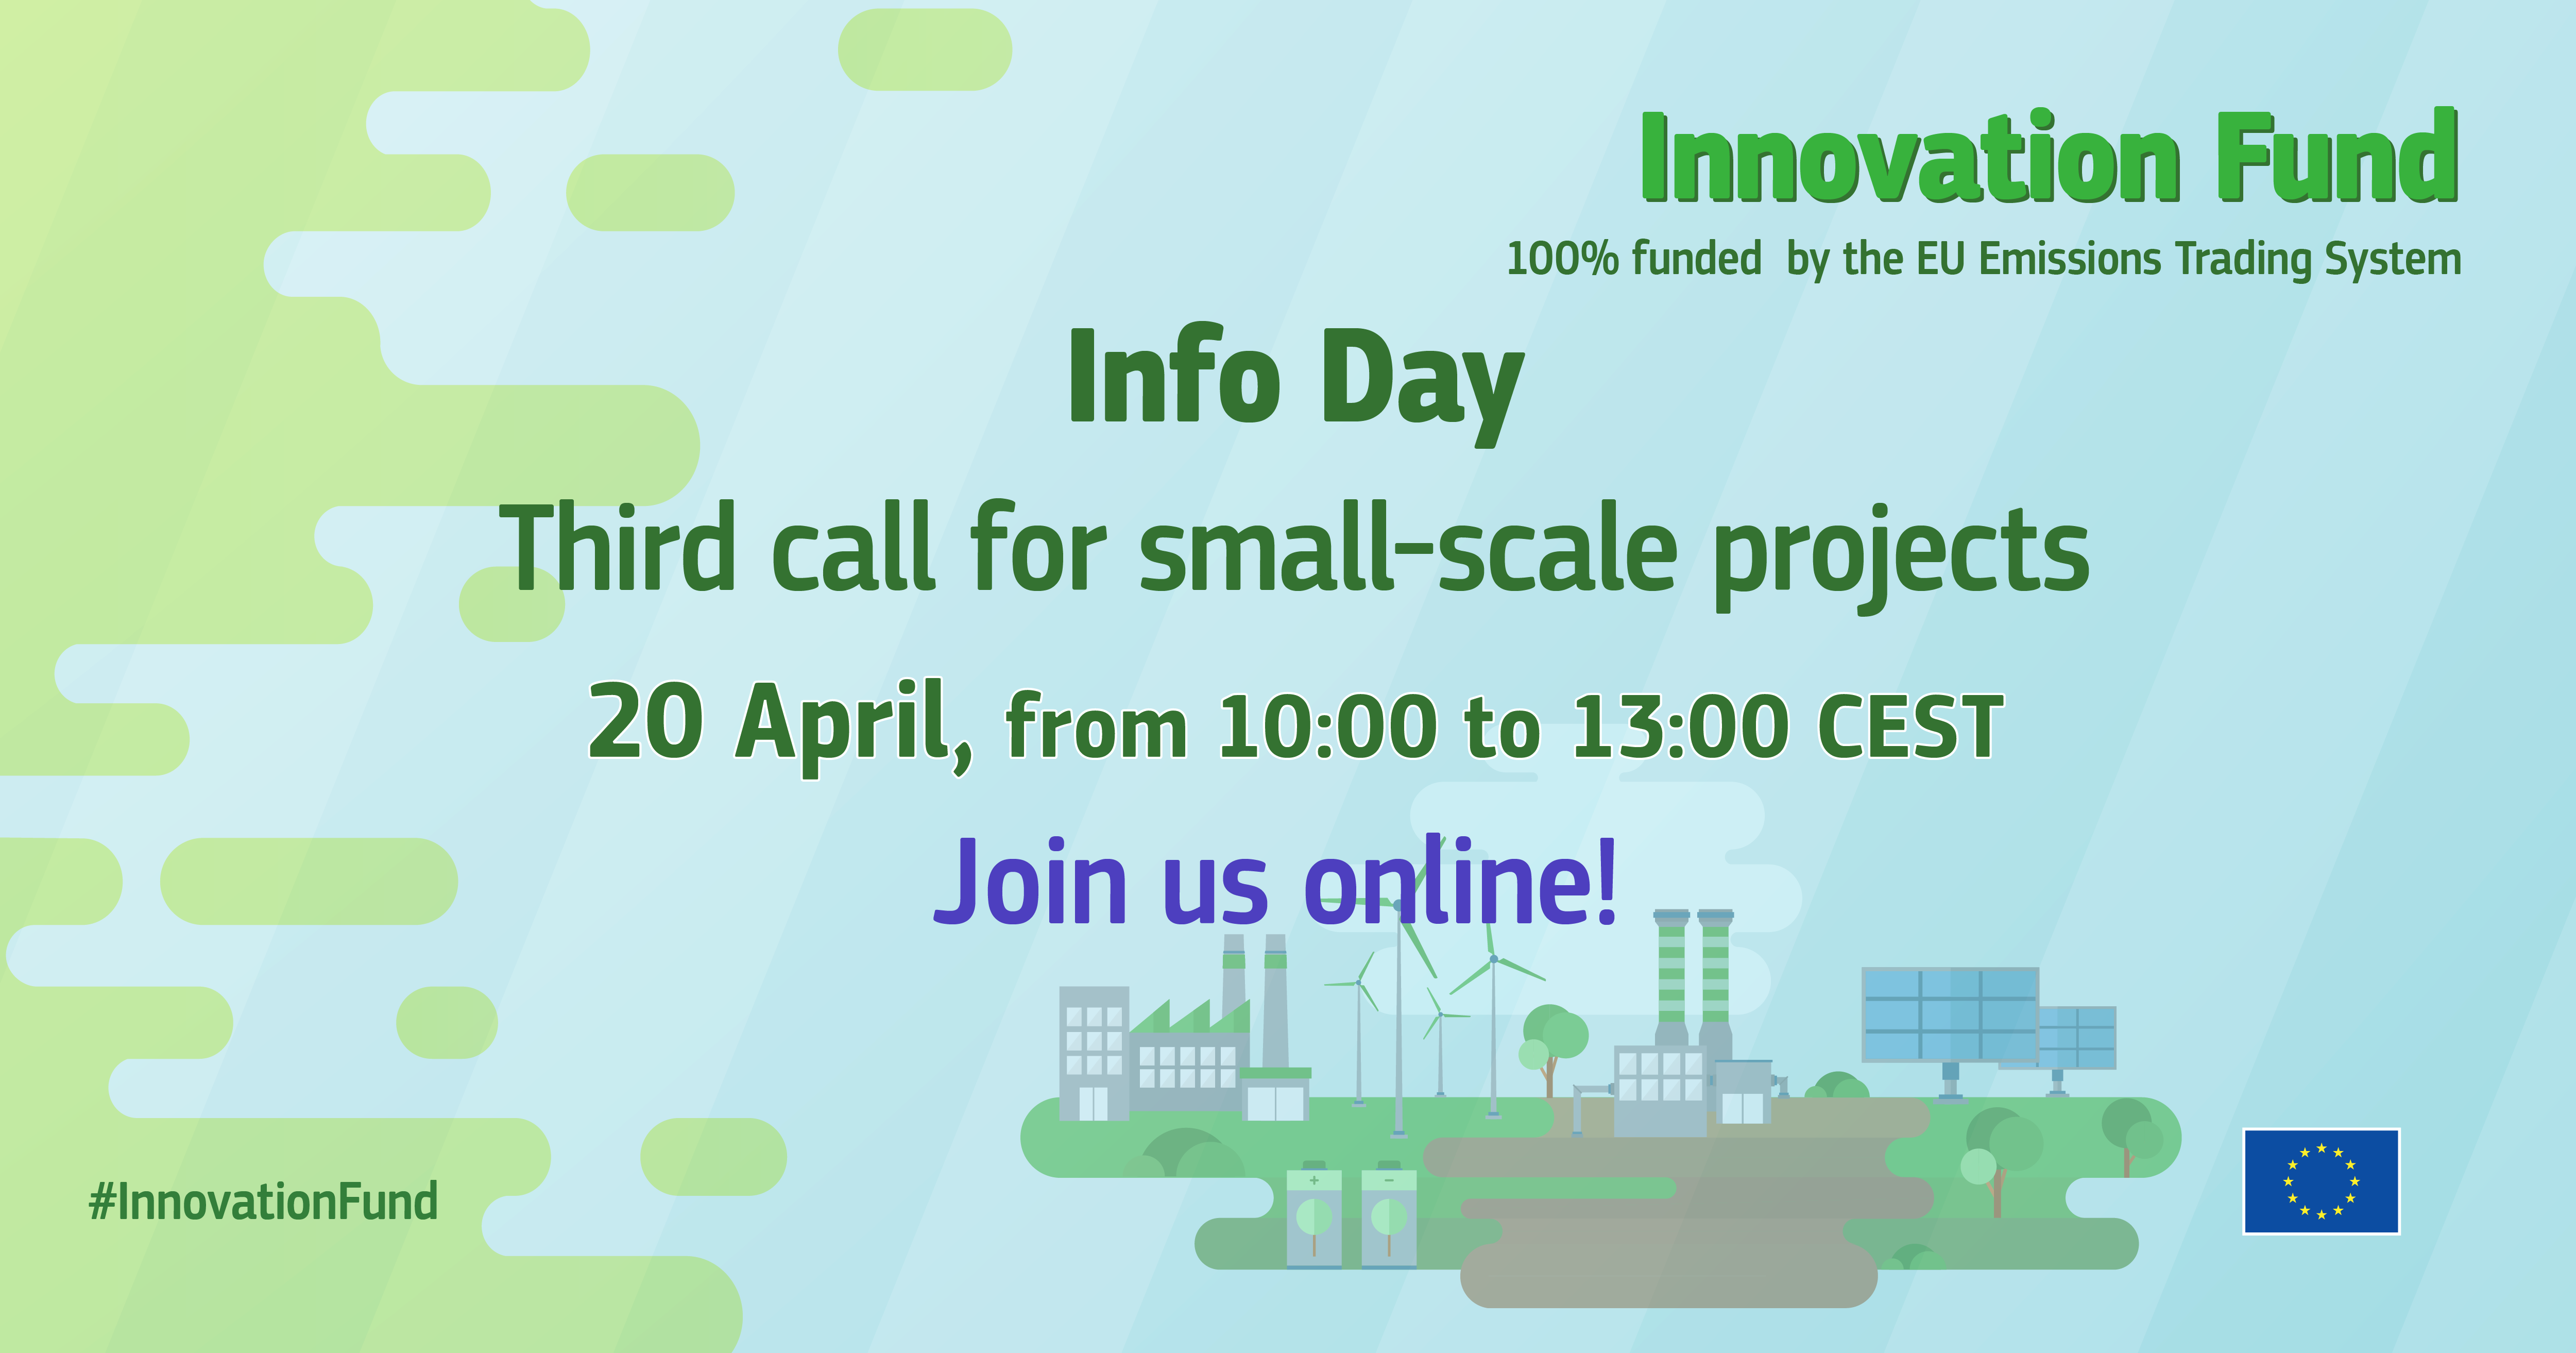 infoday-3rd-call-small-scale-projects_fb-lk_0